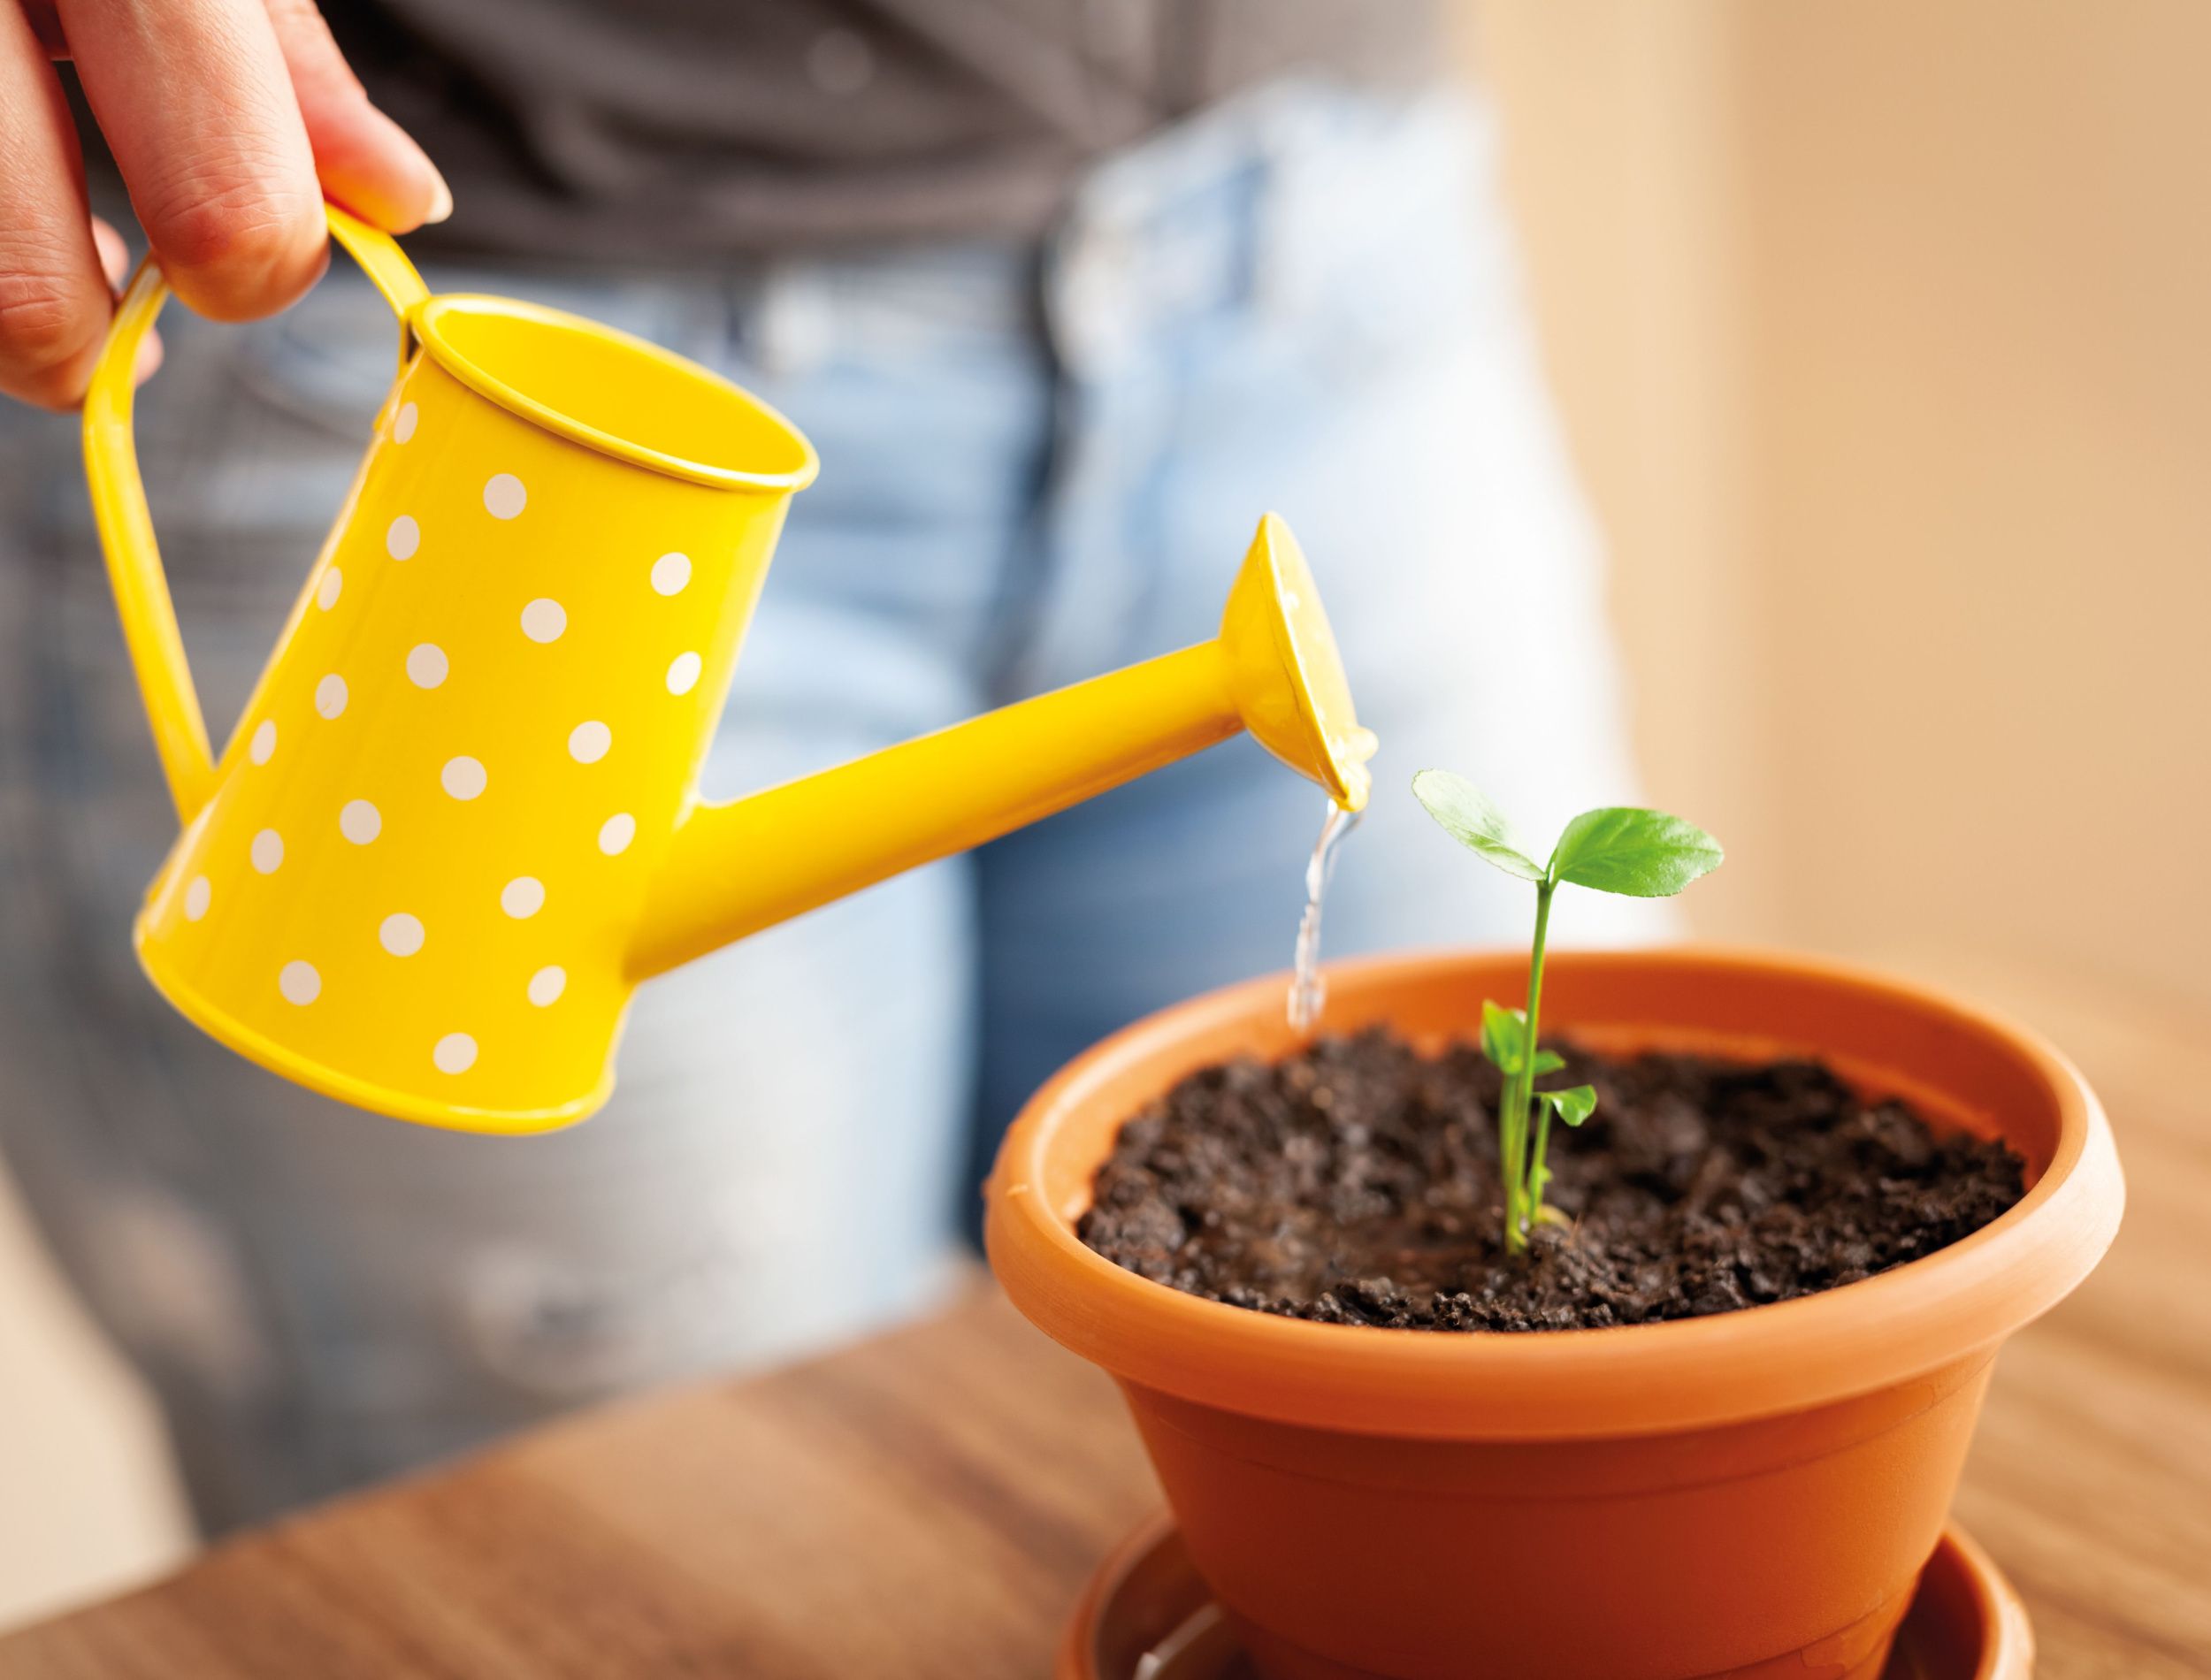 Woman hand watering lemon tree seedling in pot at home. Watering young seedling at home. Gardening and ecology concept.